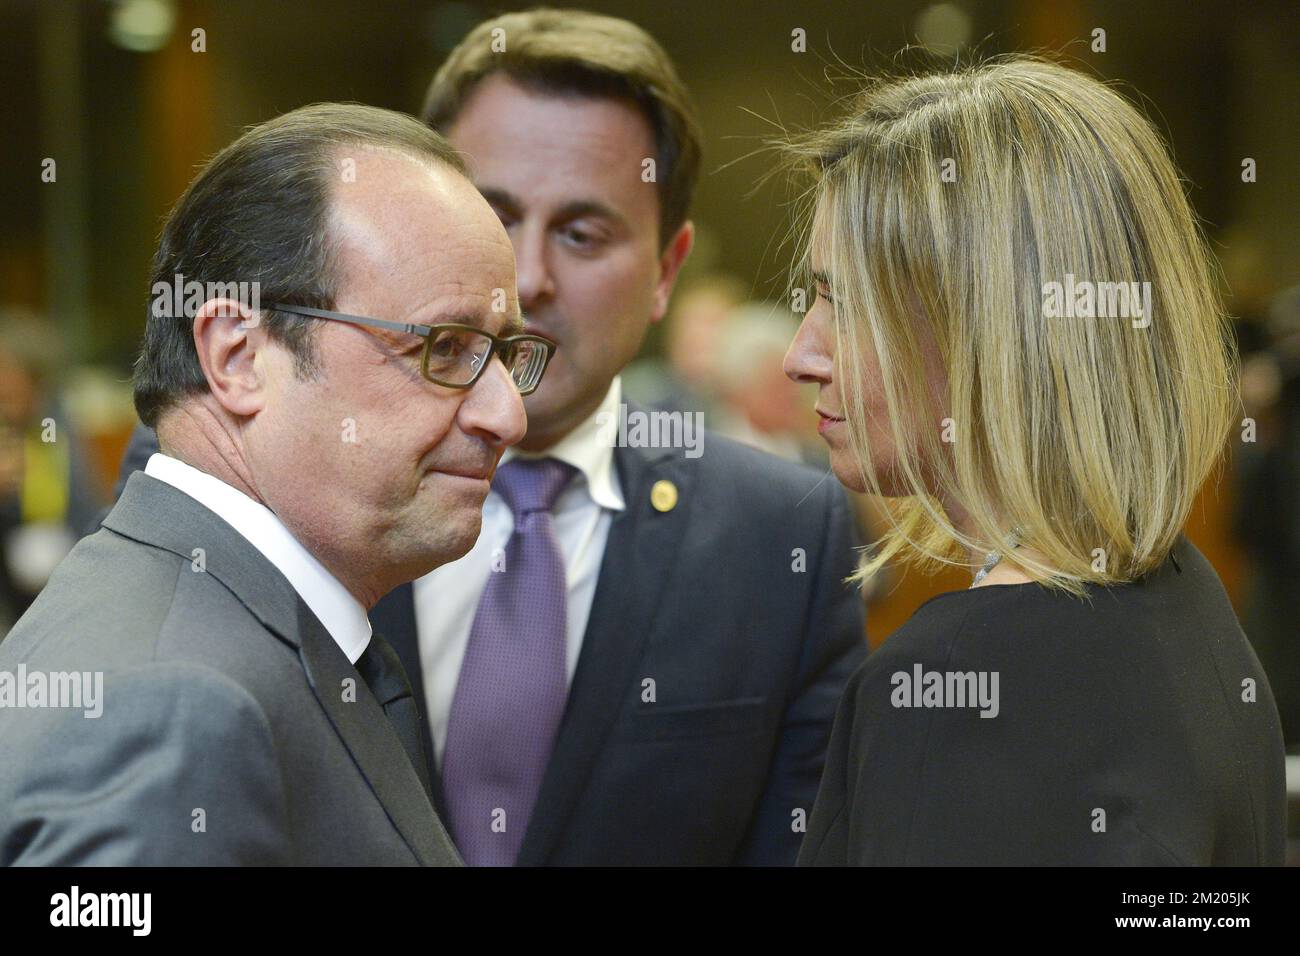 20151015 - BRUSSELS, BELGIUM: French President Francois Hollande and  Federica Mogherini, EU High Representative of the Union for Foreign Affairs  and Security Policy pictured at the round table photo opportunity in the